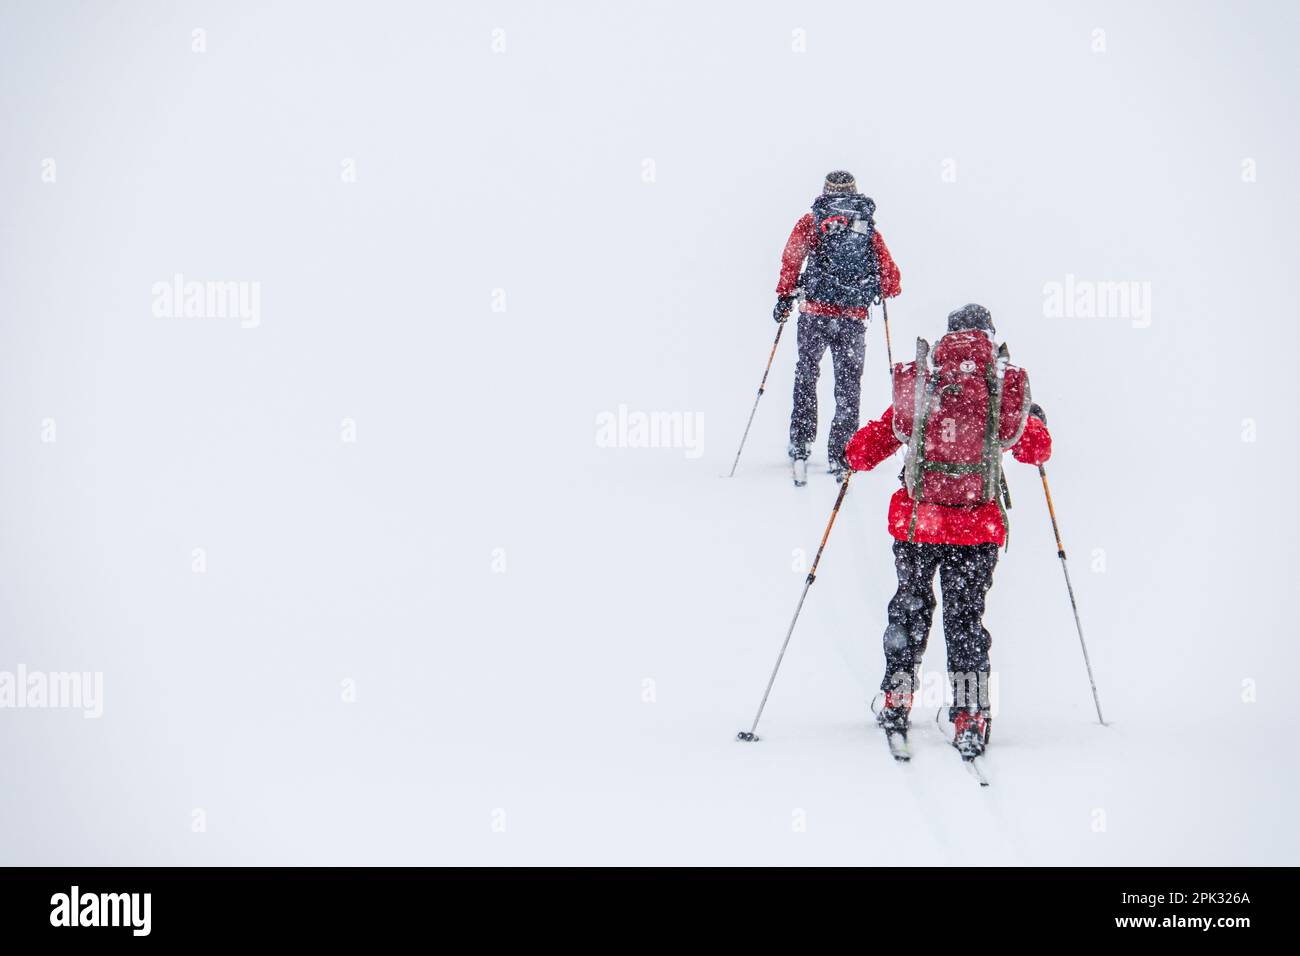 Two people mountain skiing in heavy snowfall, Norway Stock Photo